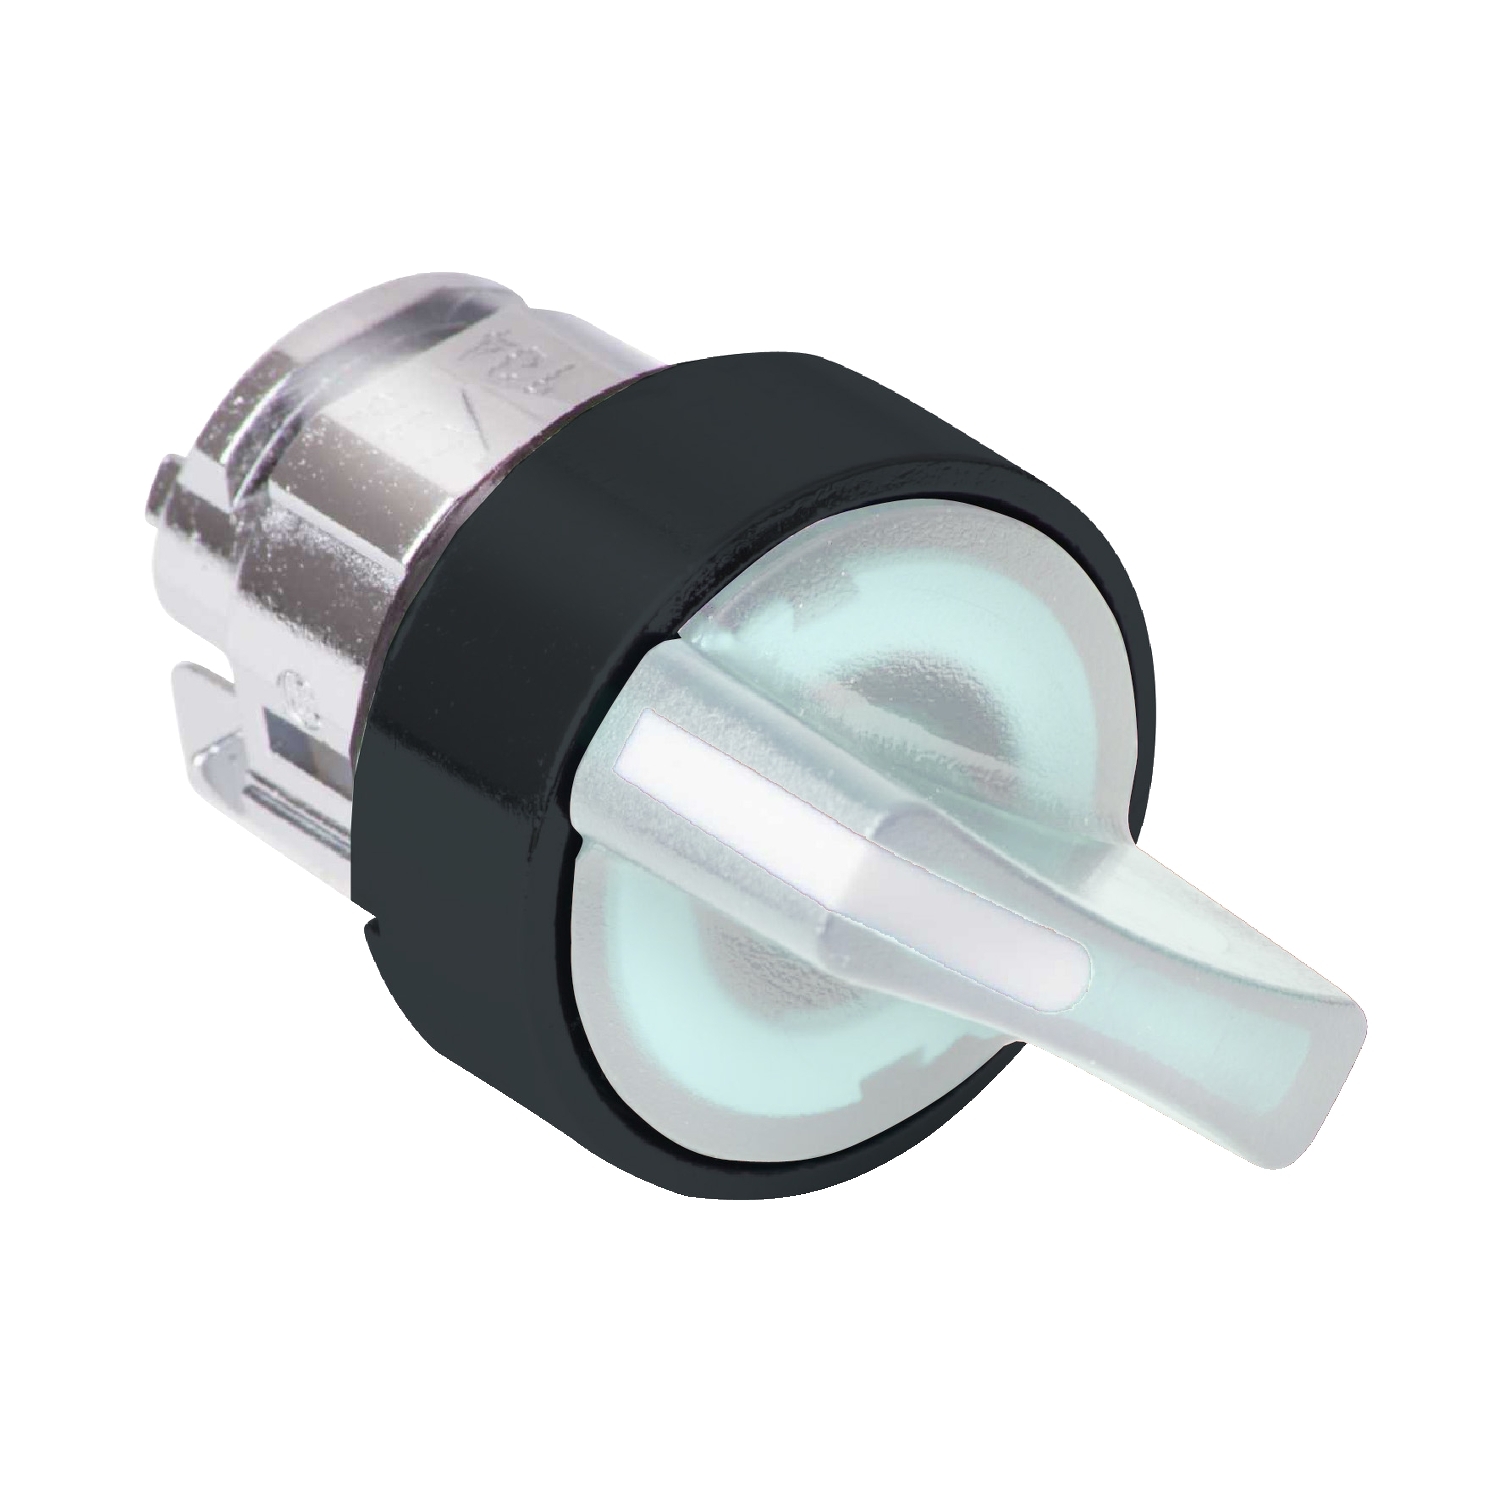 Head for illuminated selector switch, Harmony XB5, grey plastic, white handle, 22mm, universal LED, 3 positions, stay put